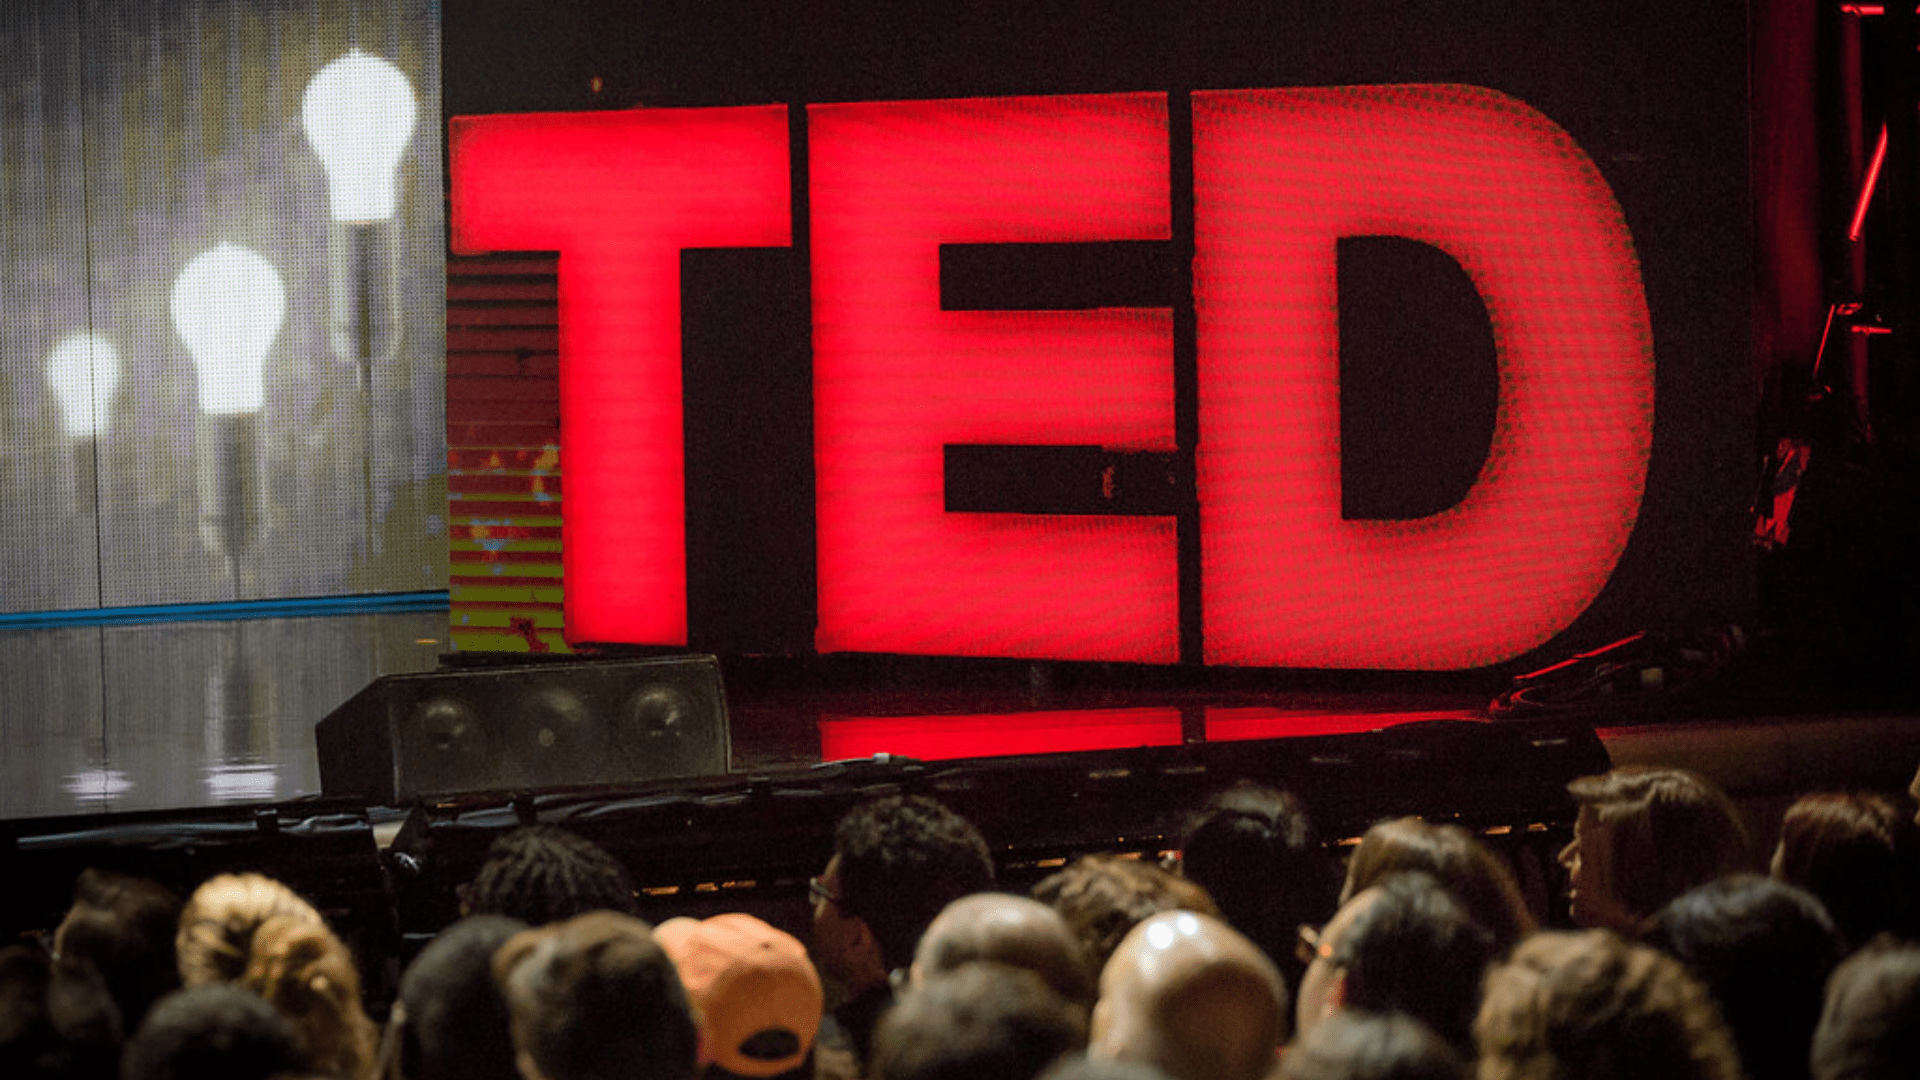 How TED talks altered the way we see public speaking